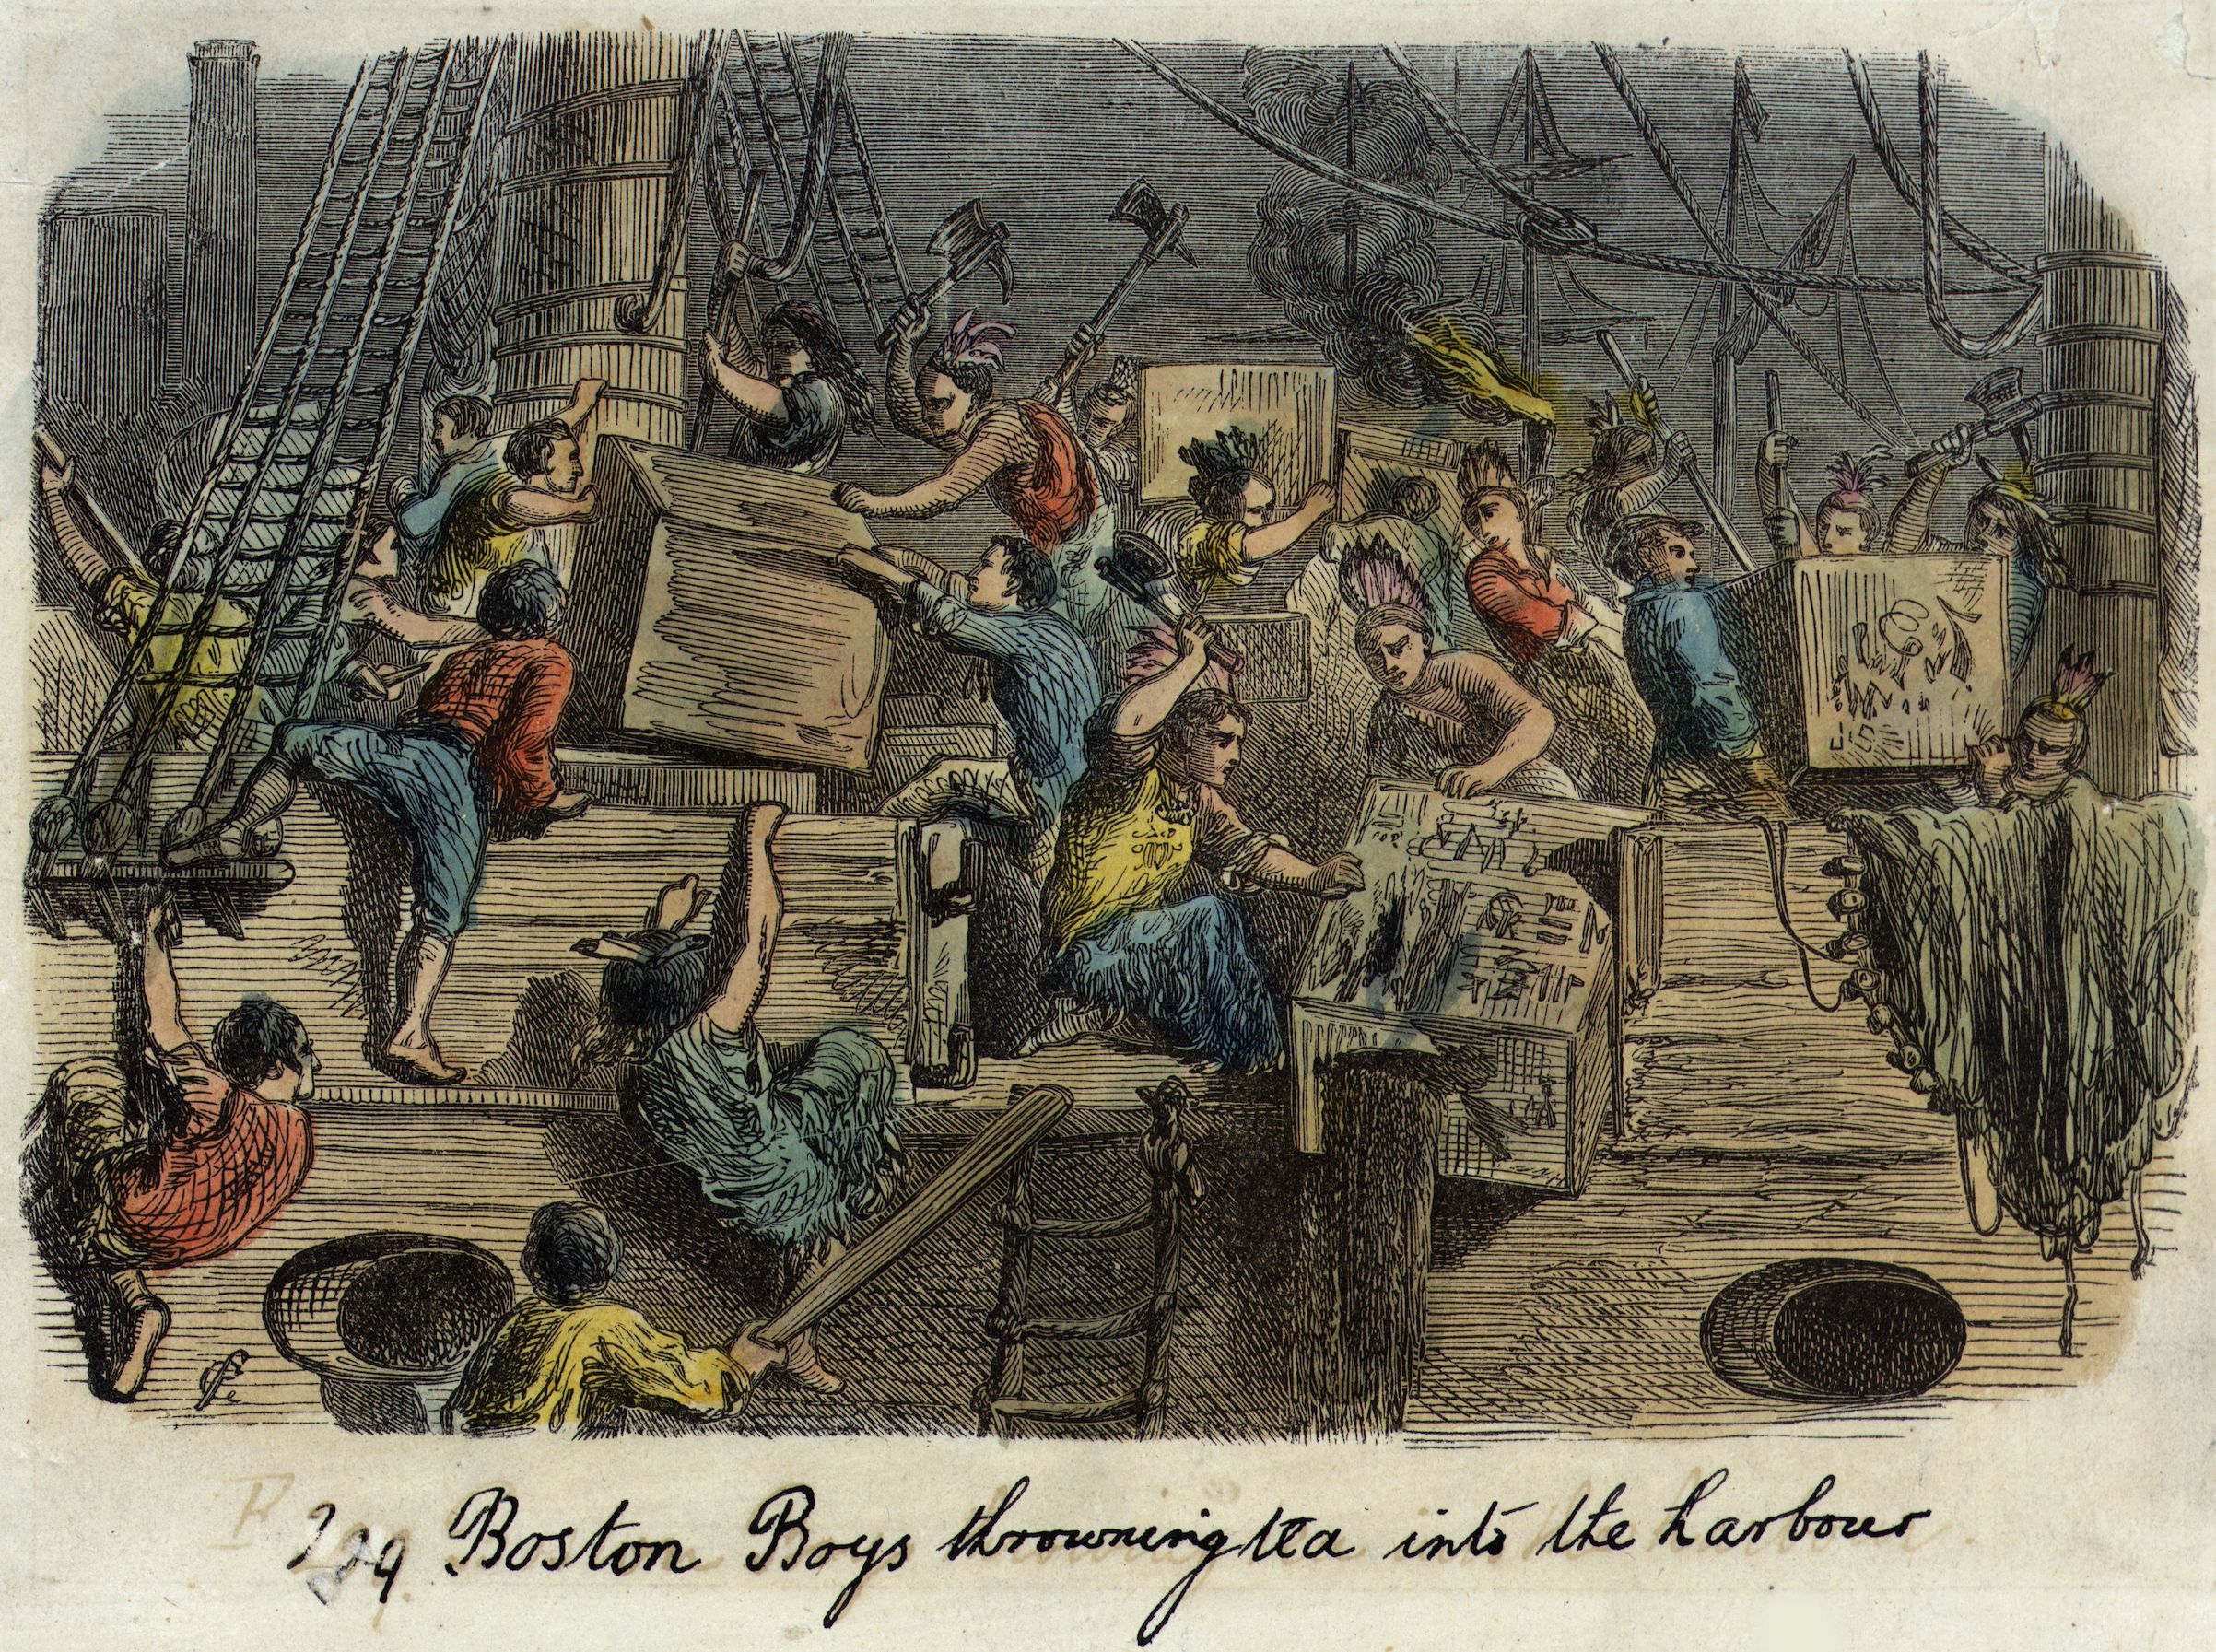 Illustration of the Boston Tea Party: A group of Bostonians, dressed as Native Americans, board a British ship laden with imported tea to throw the full crates into the harbor. (Getty Images)